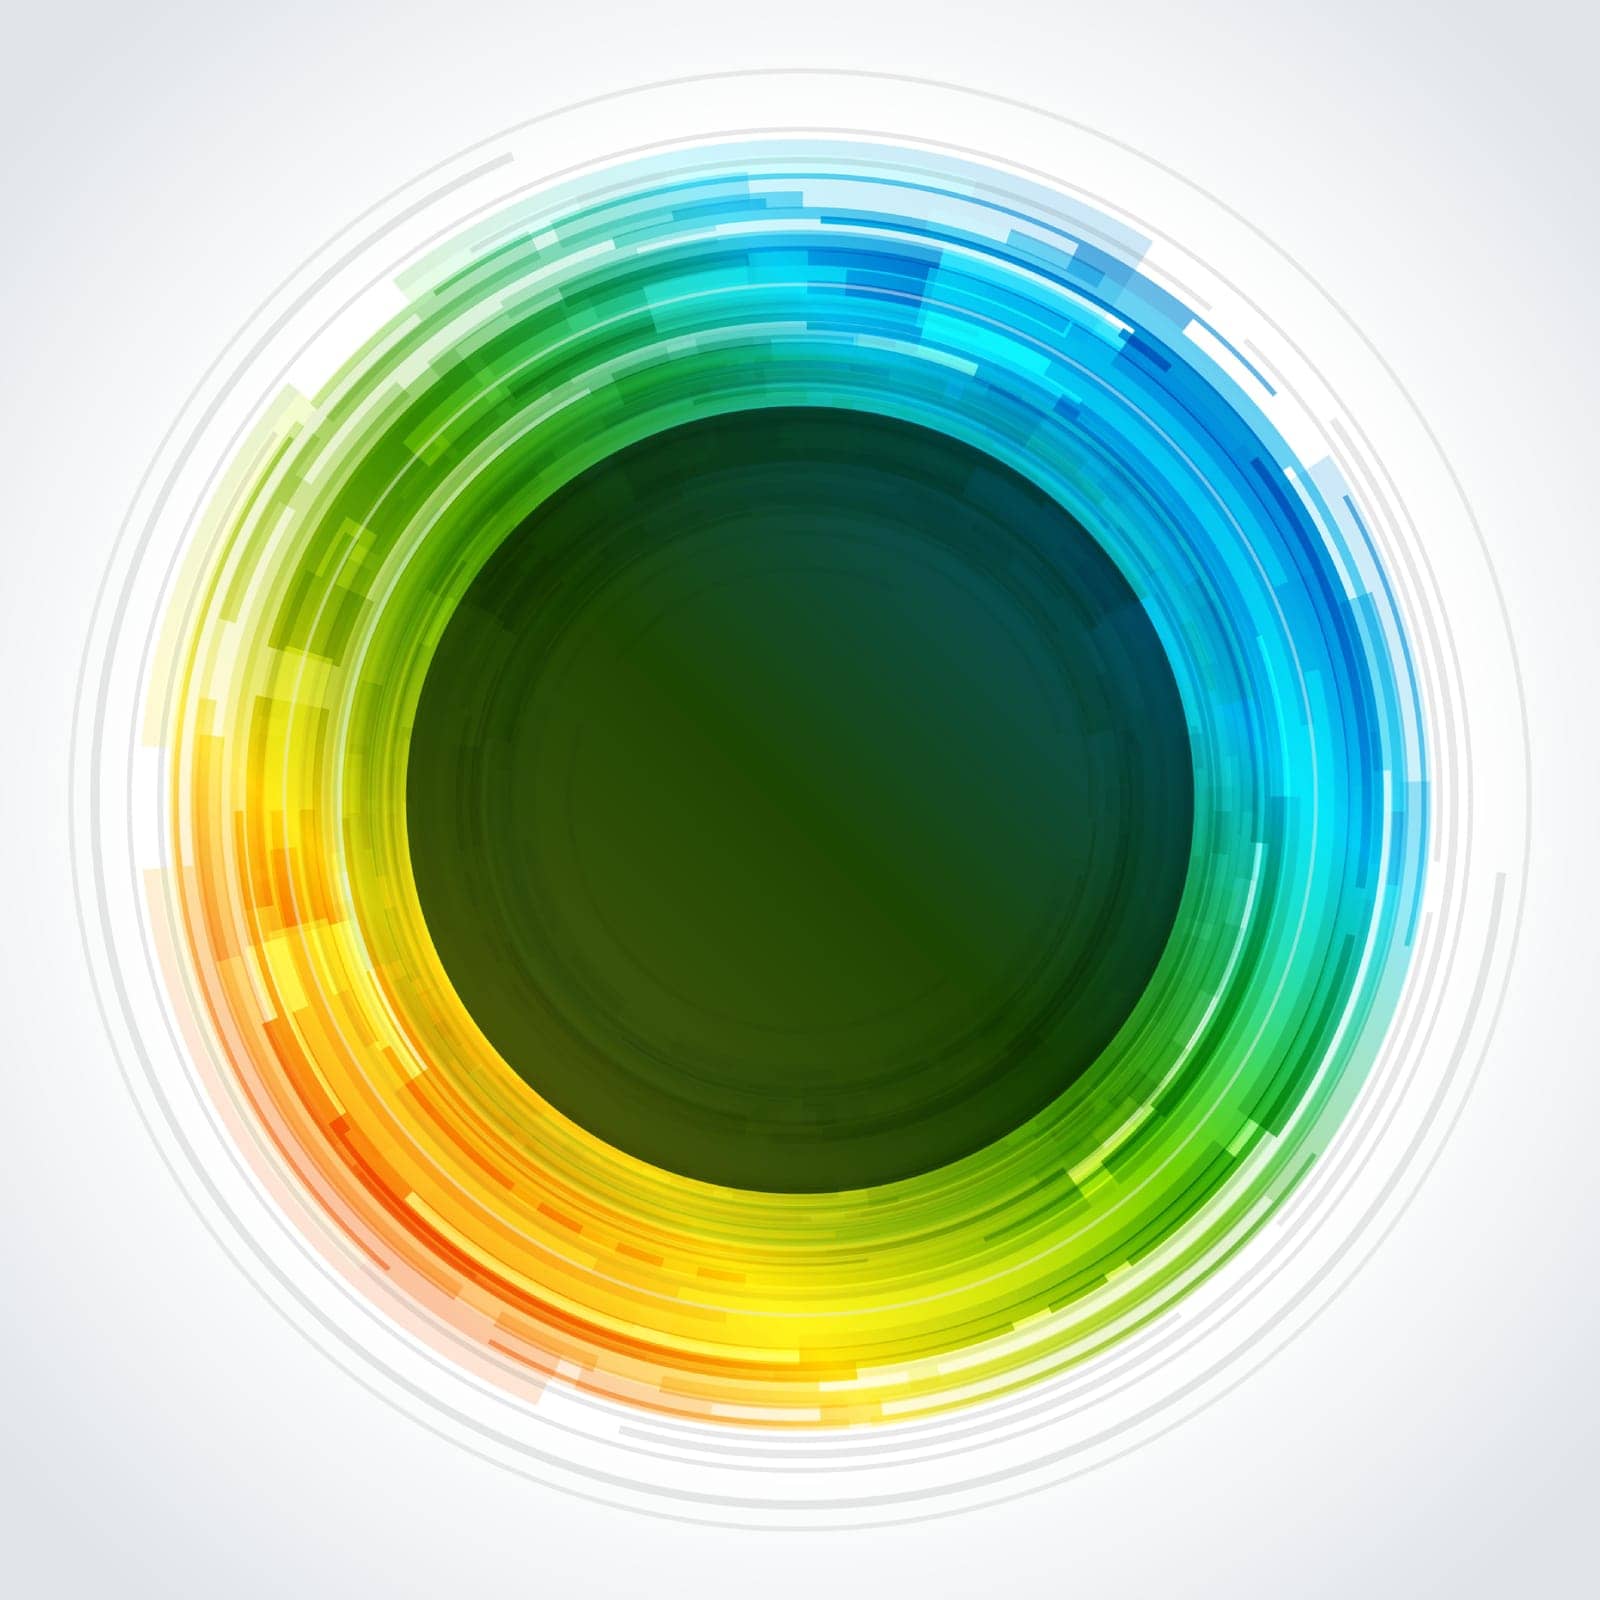 Vibrant Colorful Circle on White Background by ProVectors